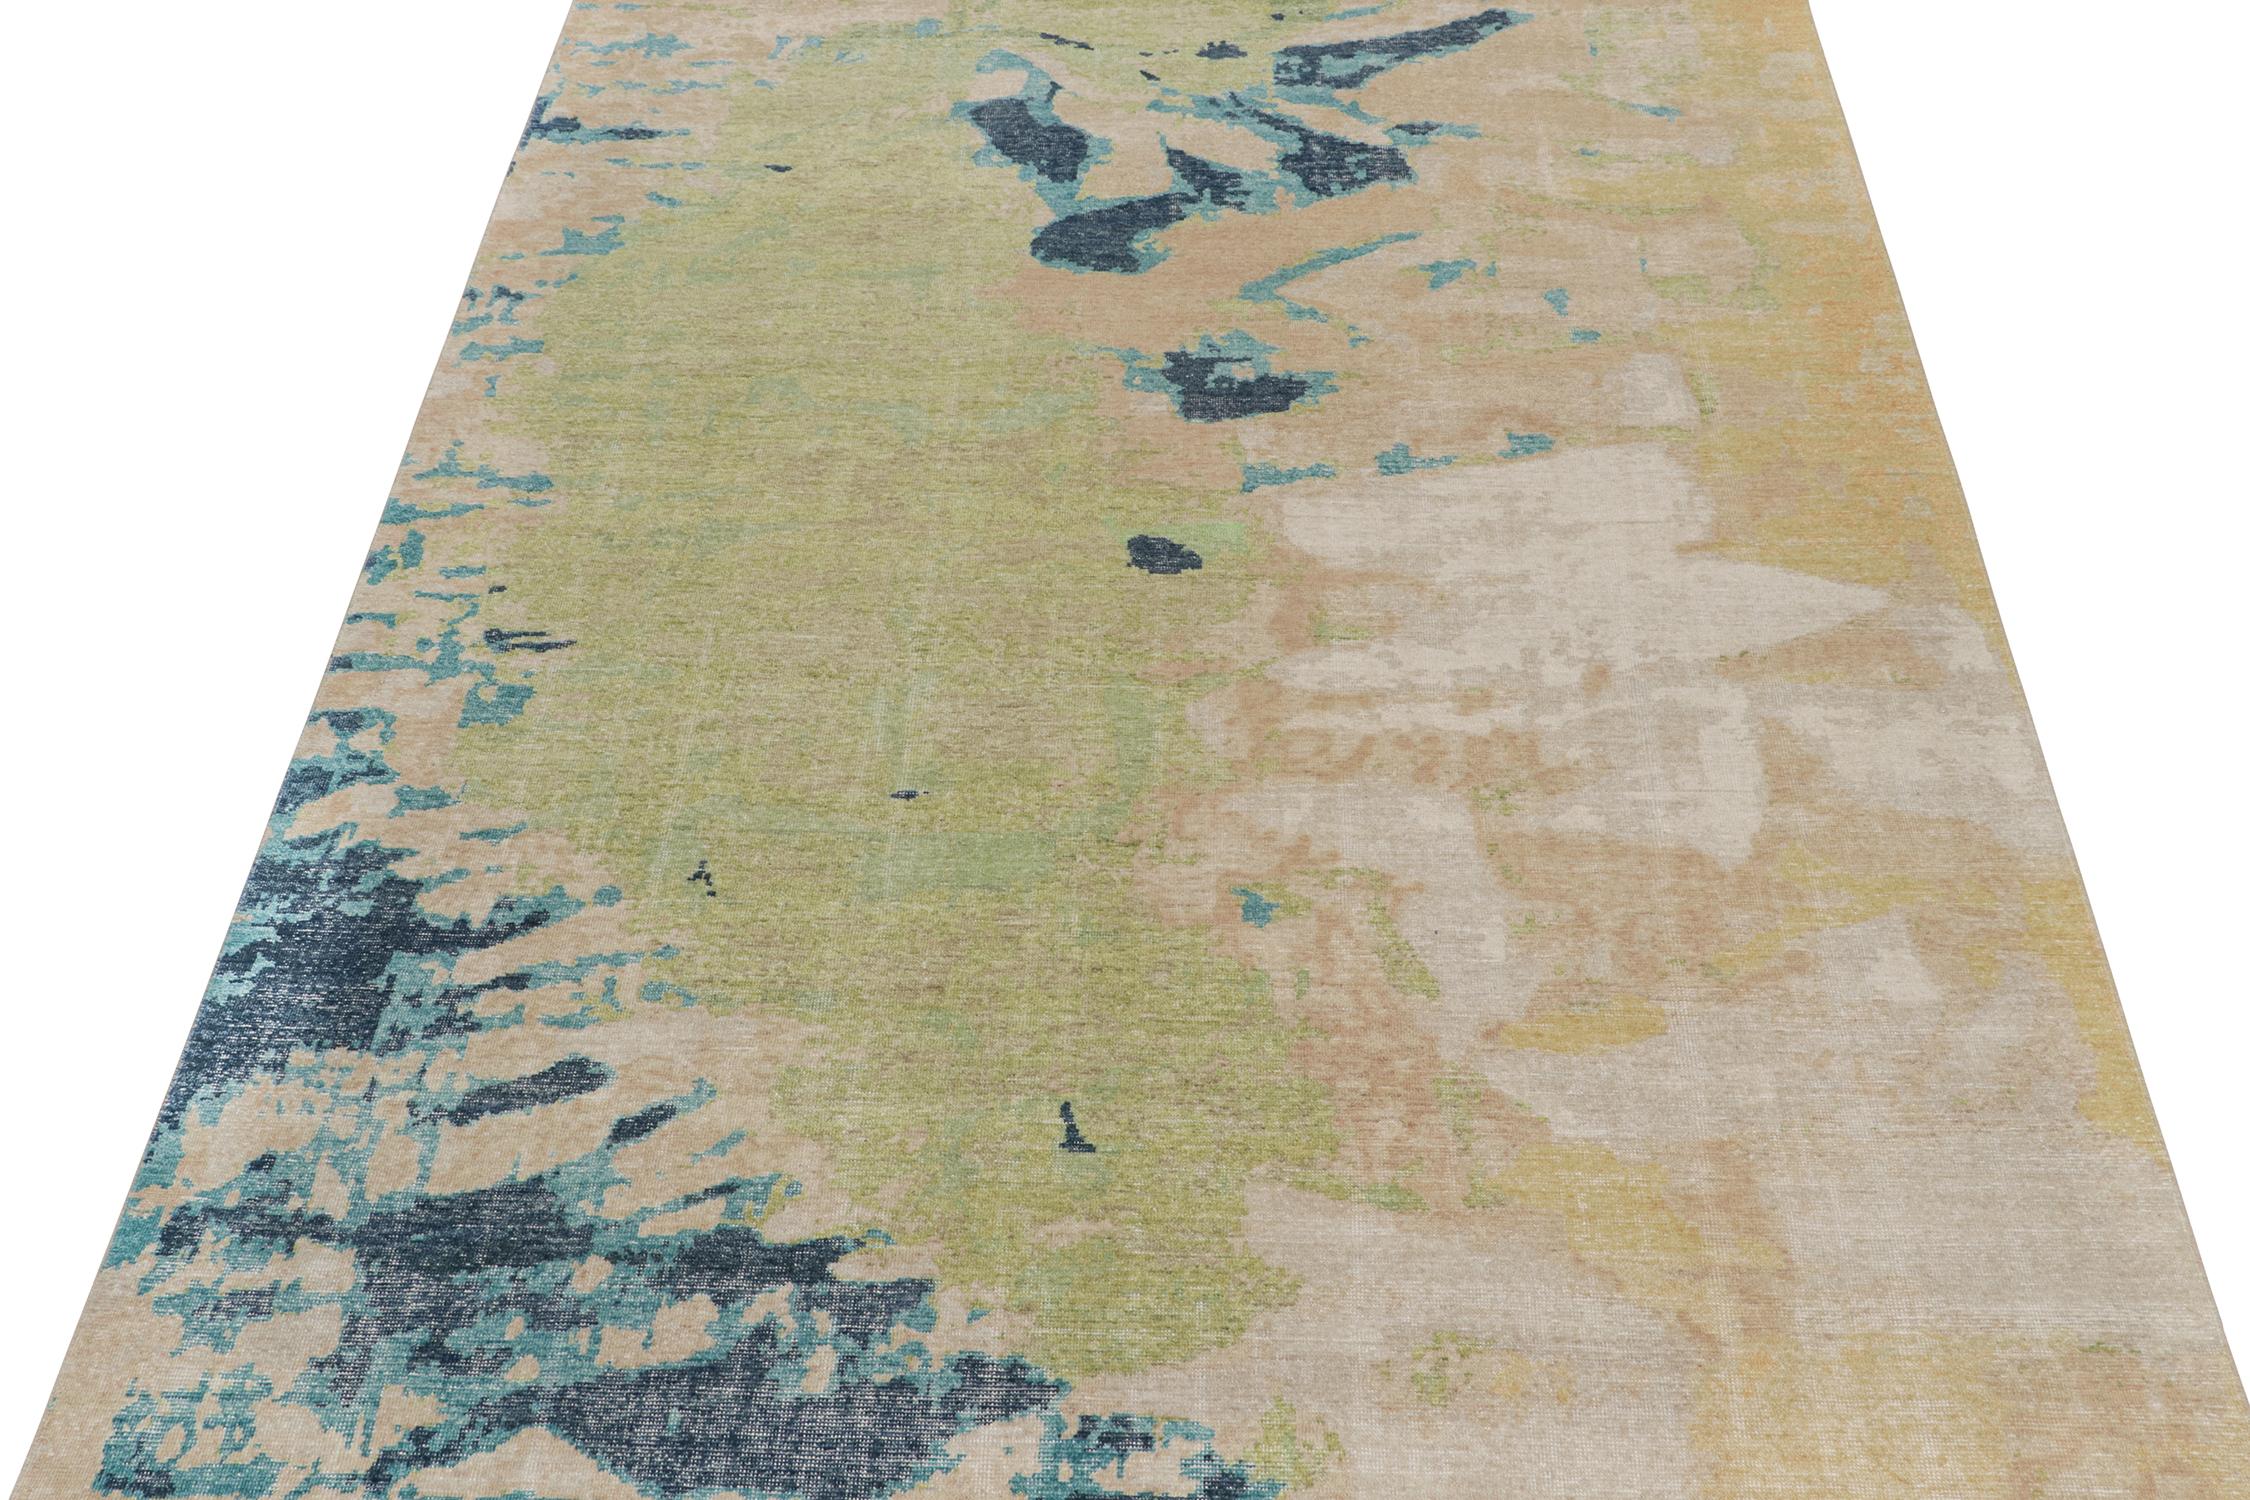 ??This contemporary 9x12 abstract rug is a new addition to the Homage Collection by Rug & Kilim.

Further On the Design:

Hand-knotted in wool and cotton, this design evokes a fluid play blue, green, beige, and gold paint strokes. Keen eyes might